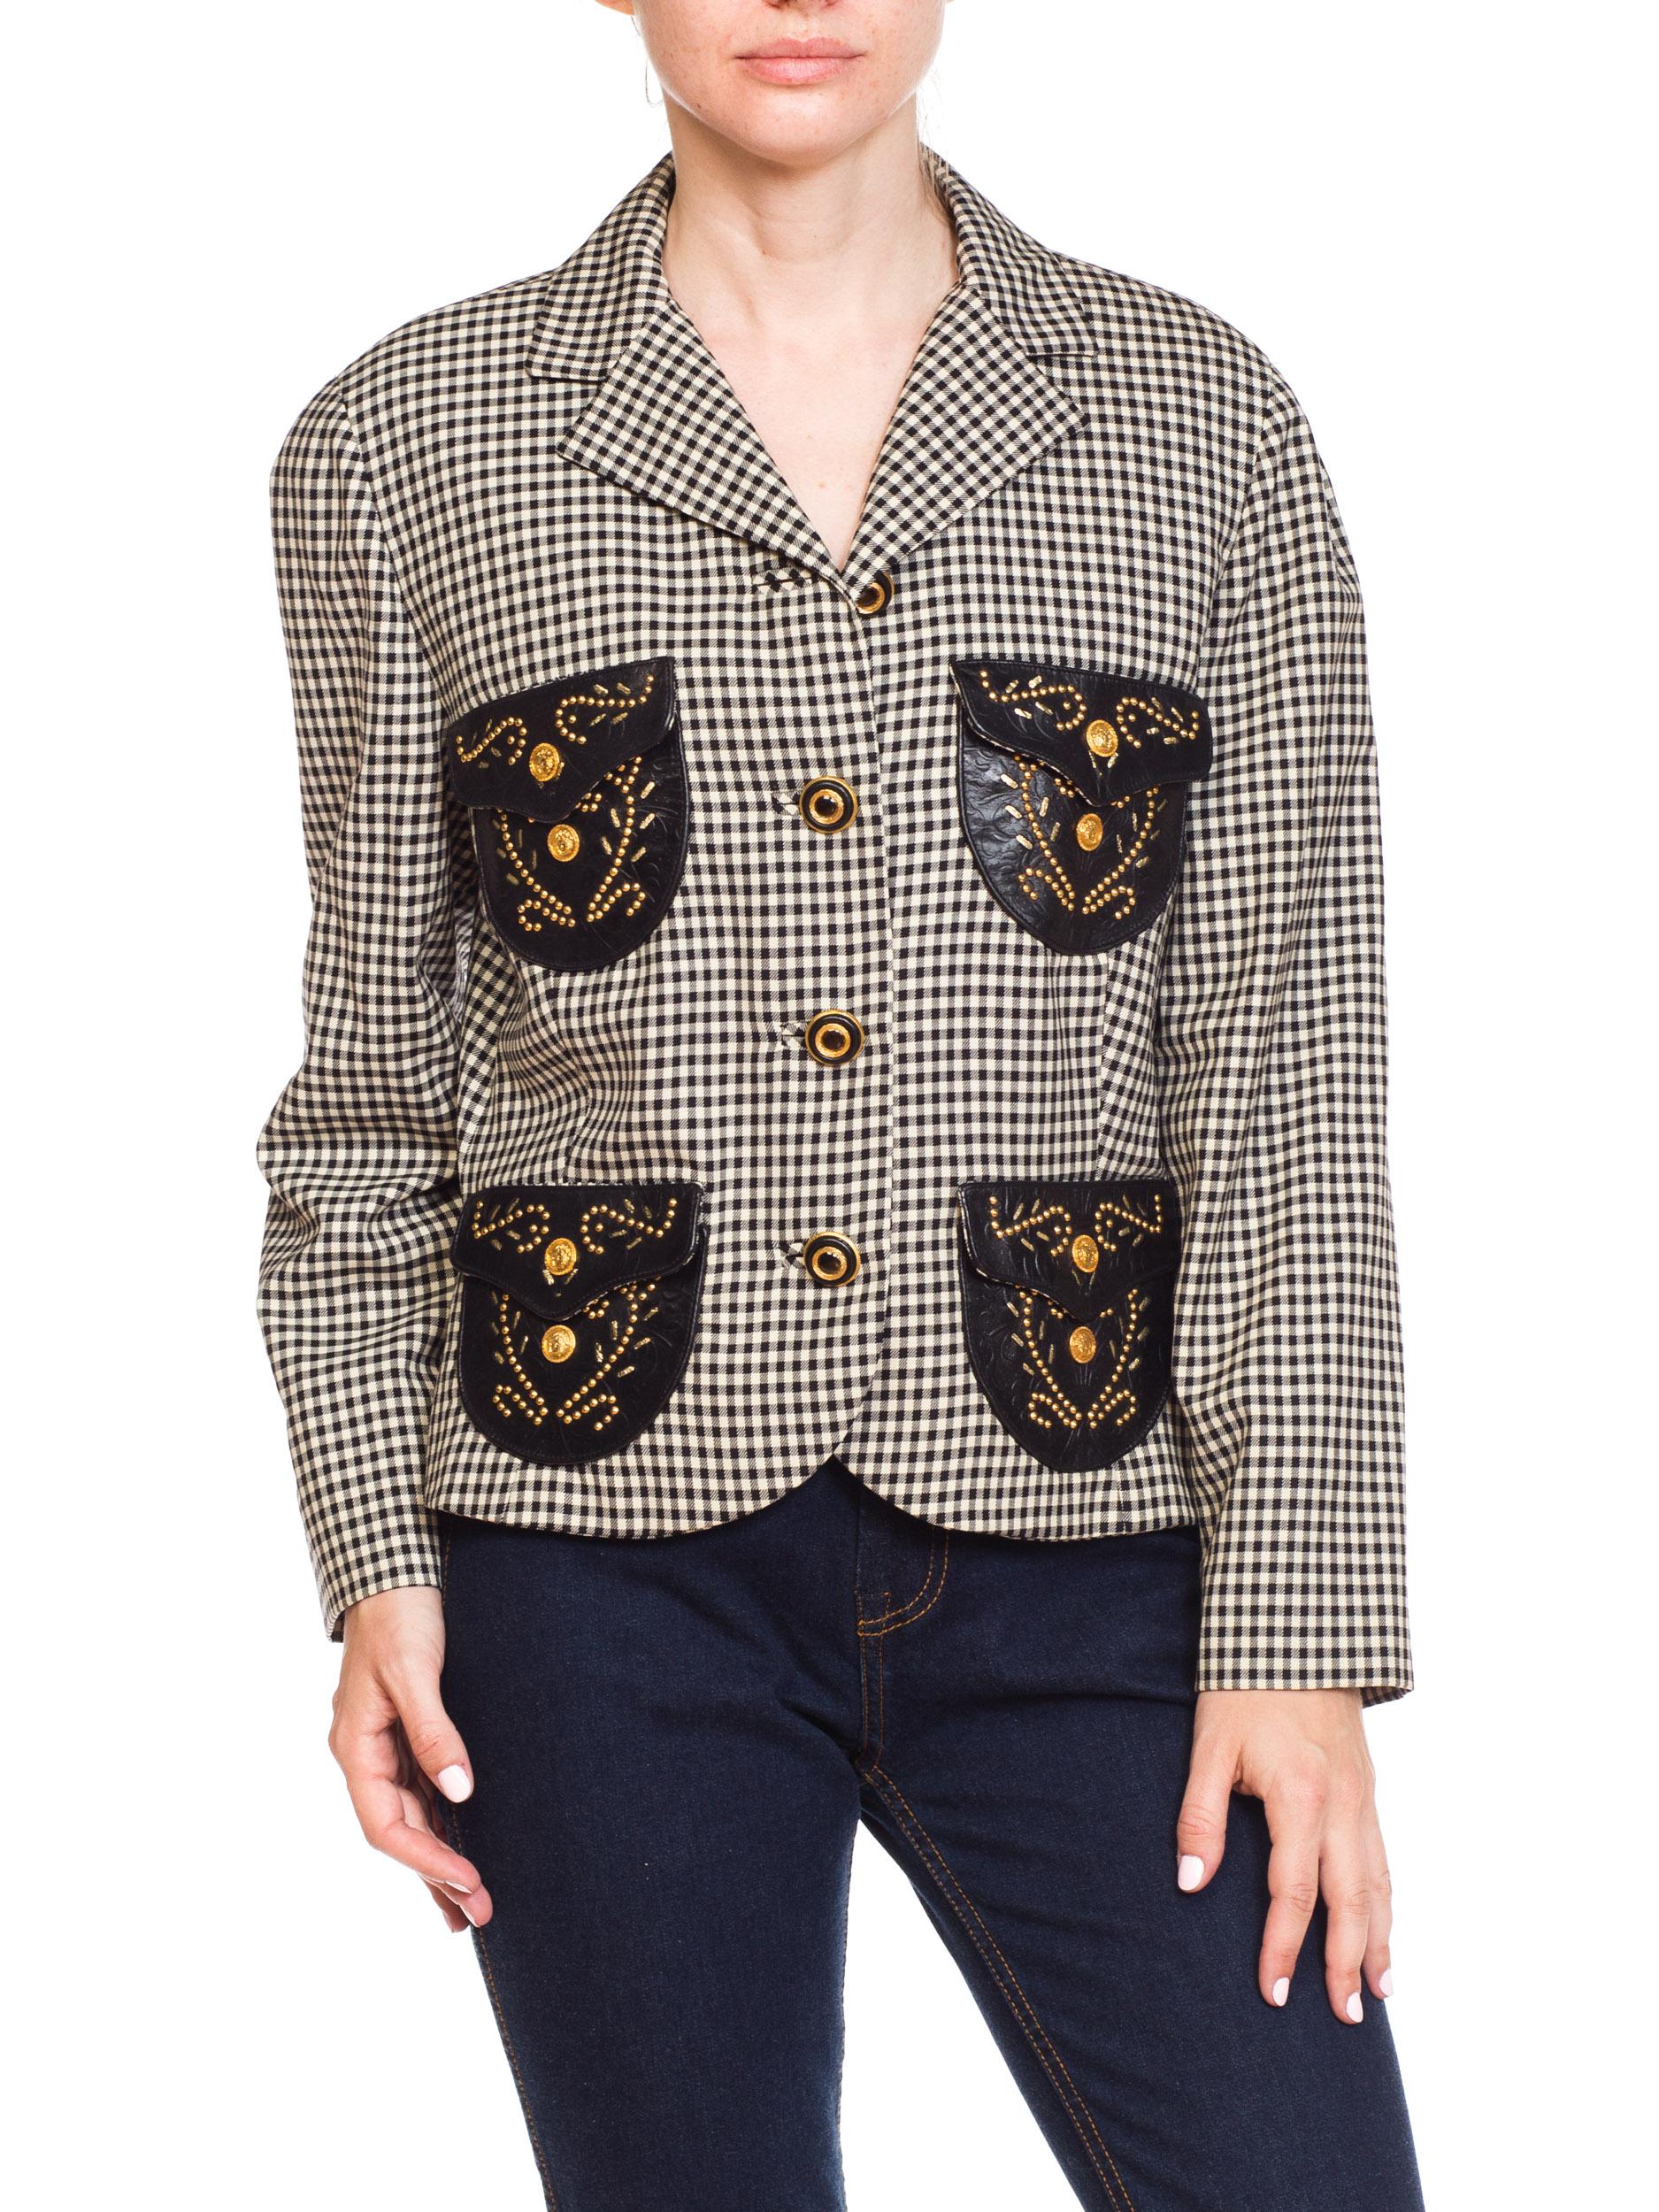 Brown 1990S GIANNI VERSACE Western Collection Jacket With Gold Stud & Leather Details